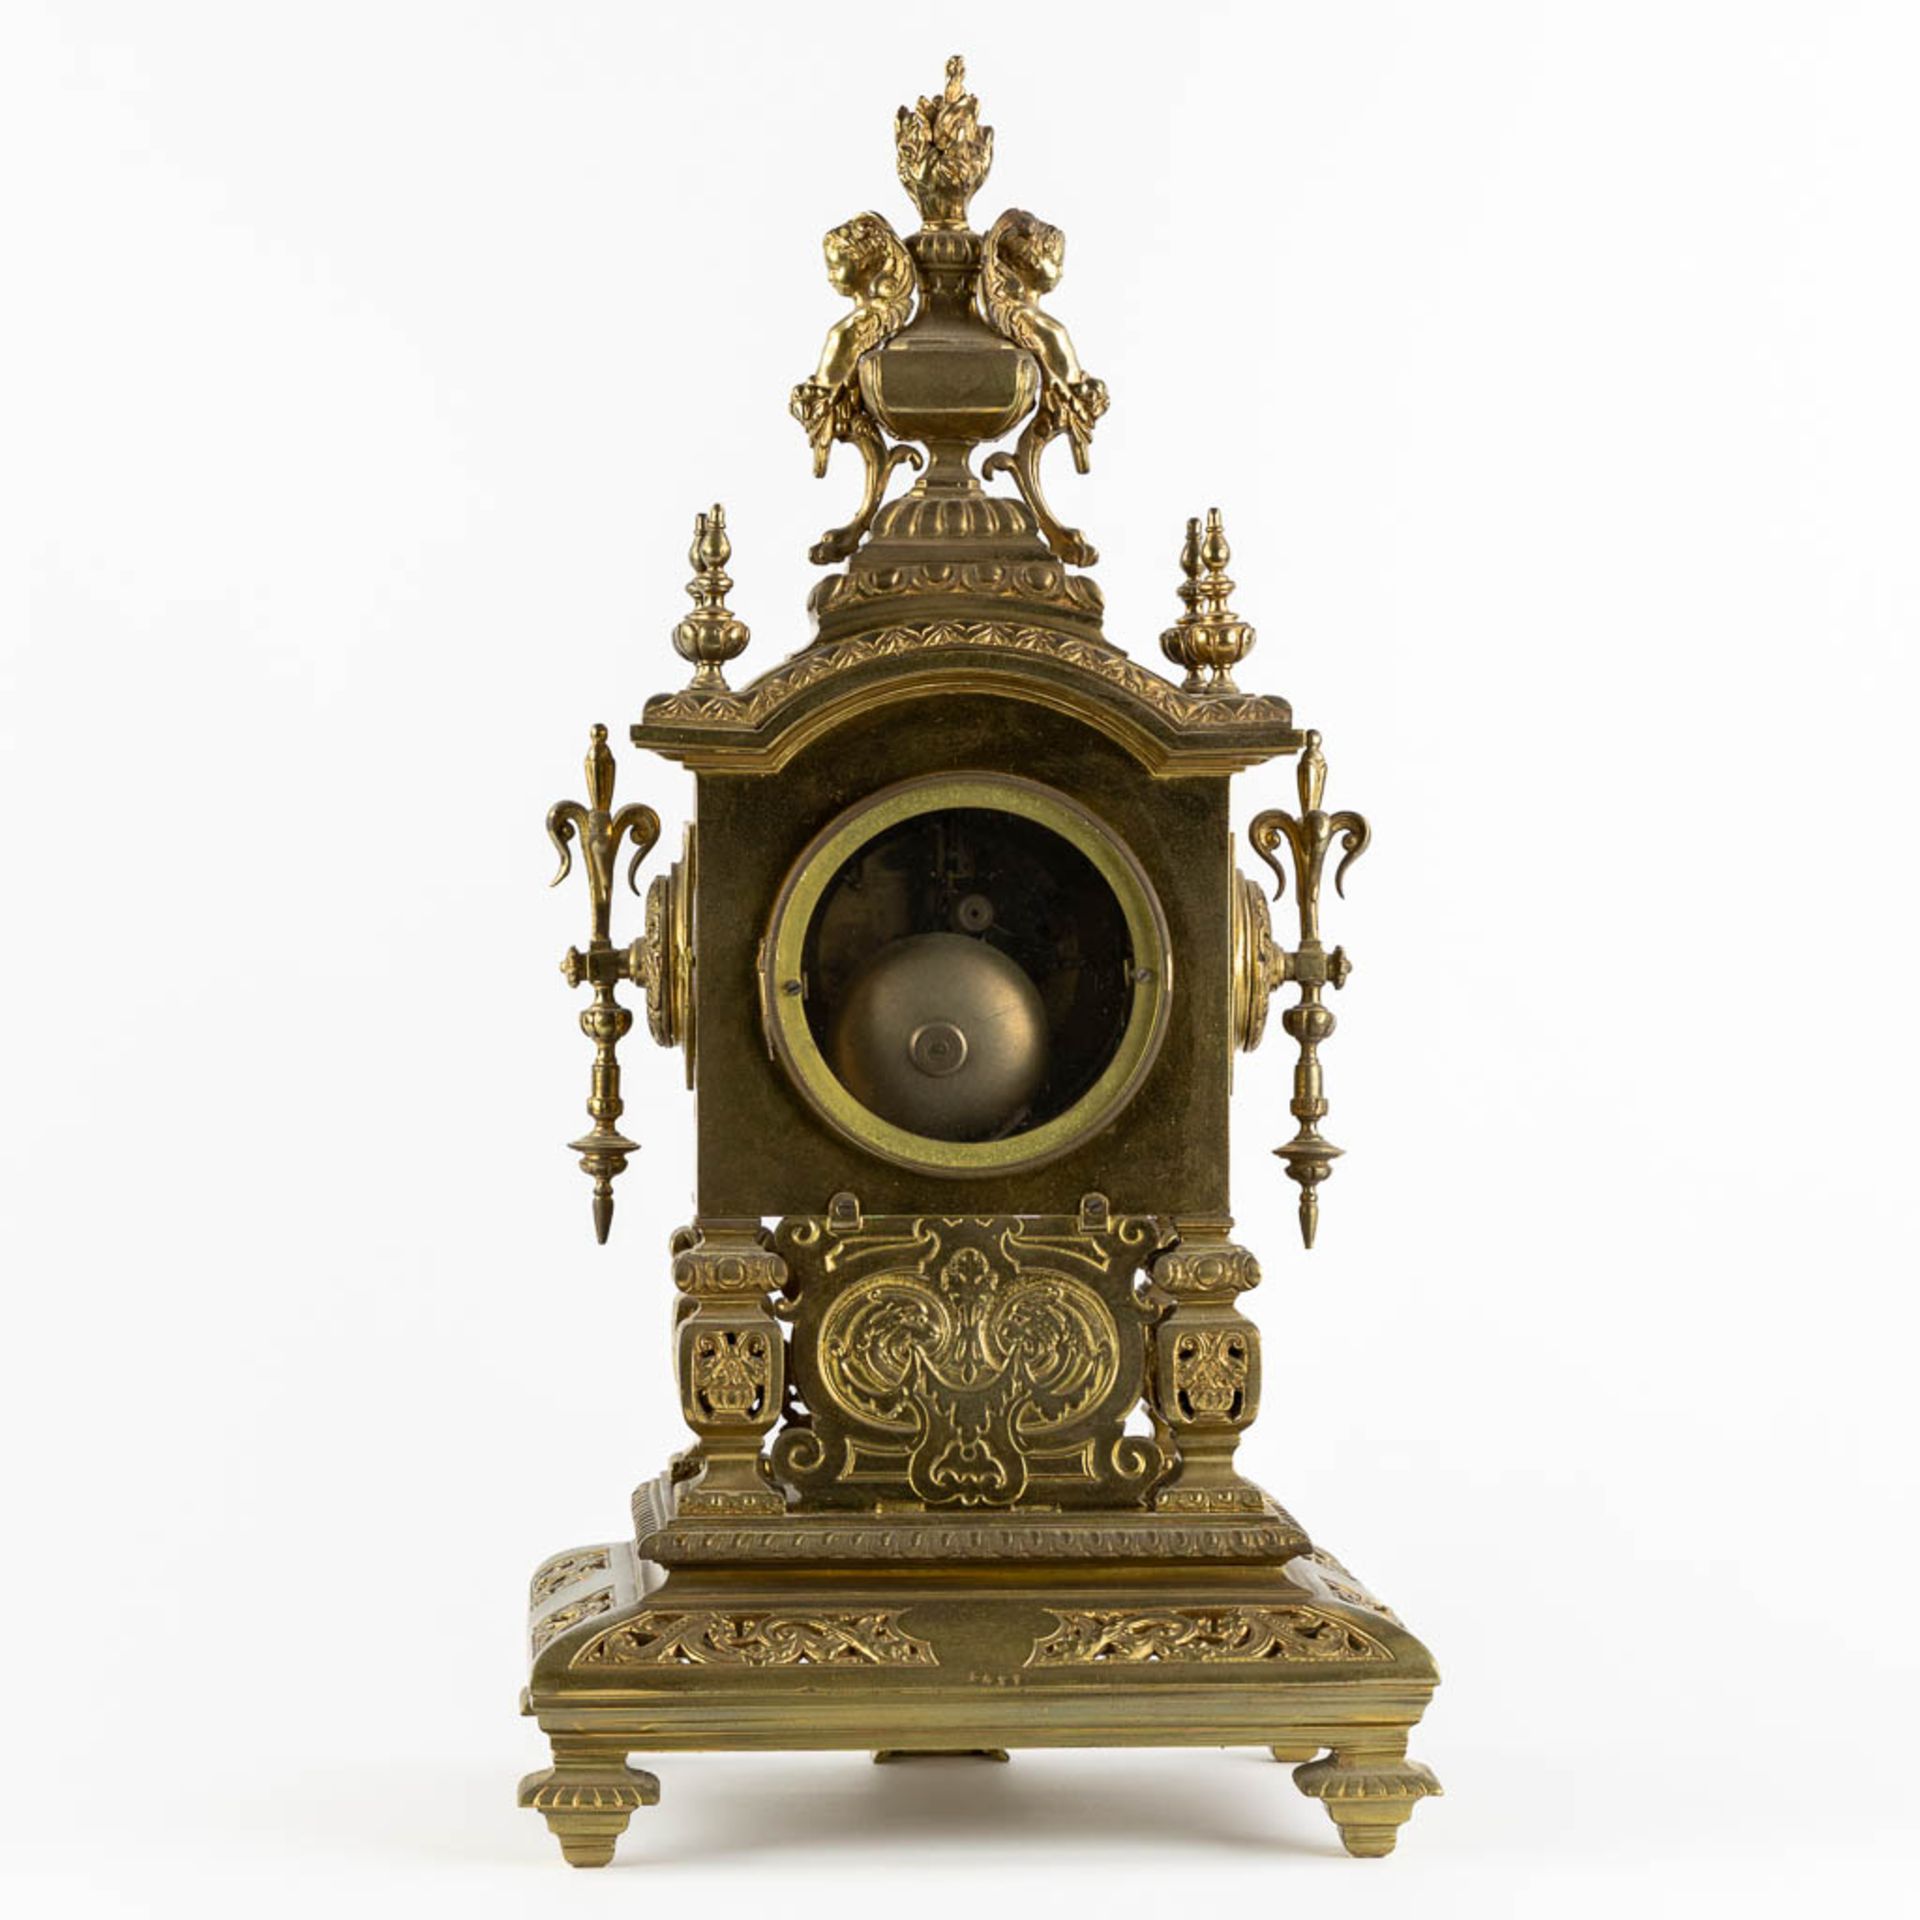 A mantle clock, bronze decorated with angels. Circa 1900. (L:21 x W:27 x H:54 cm) - Image 5 of 13